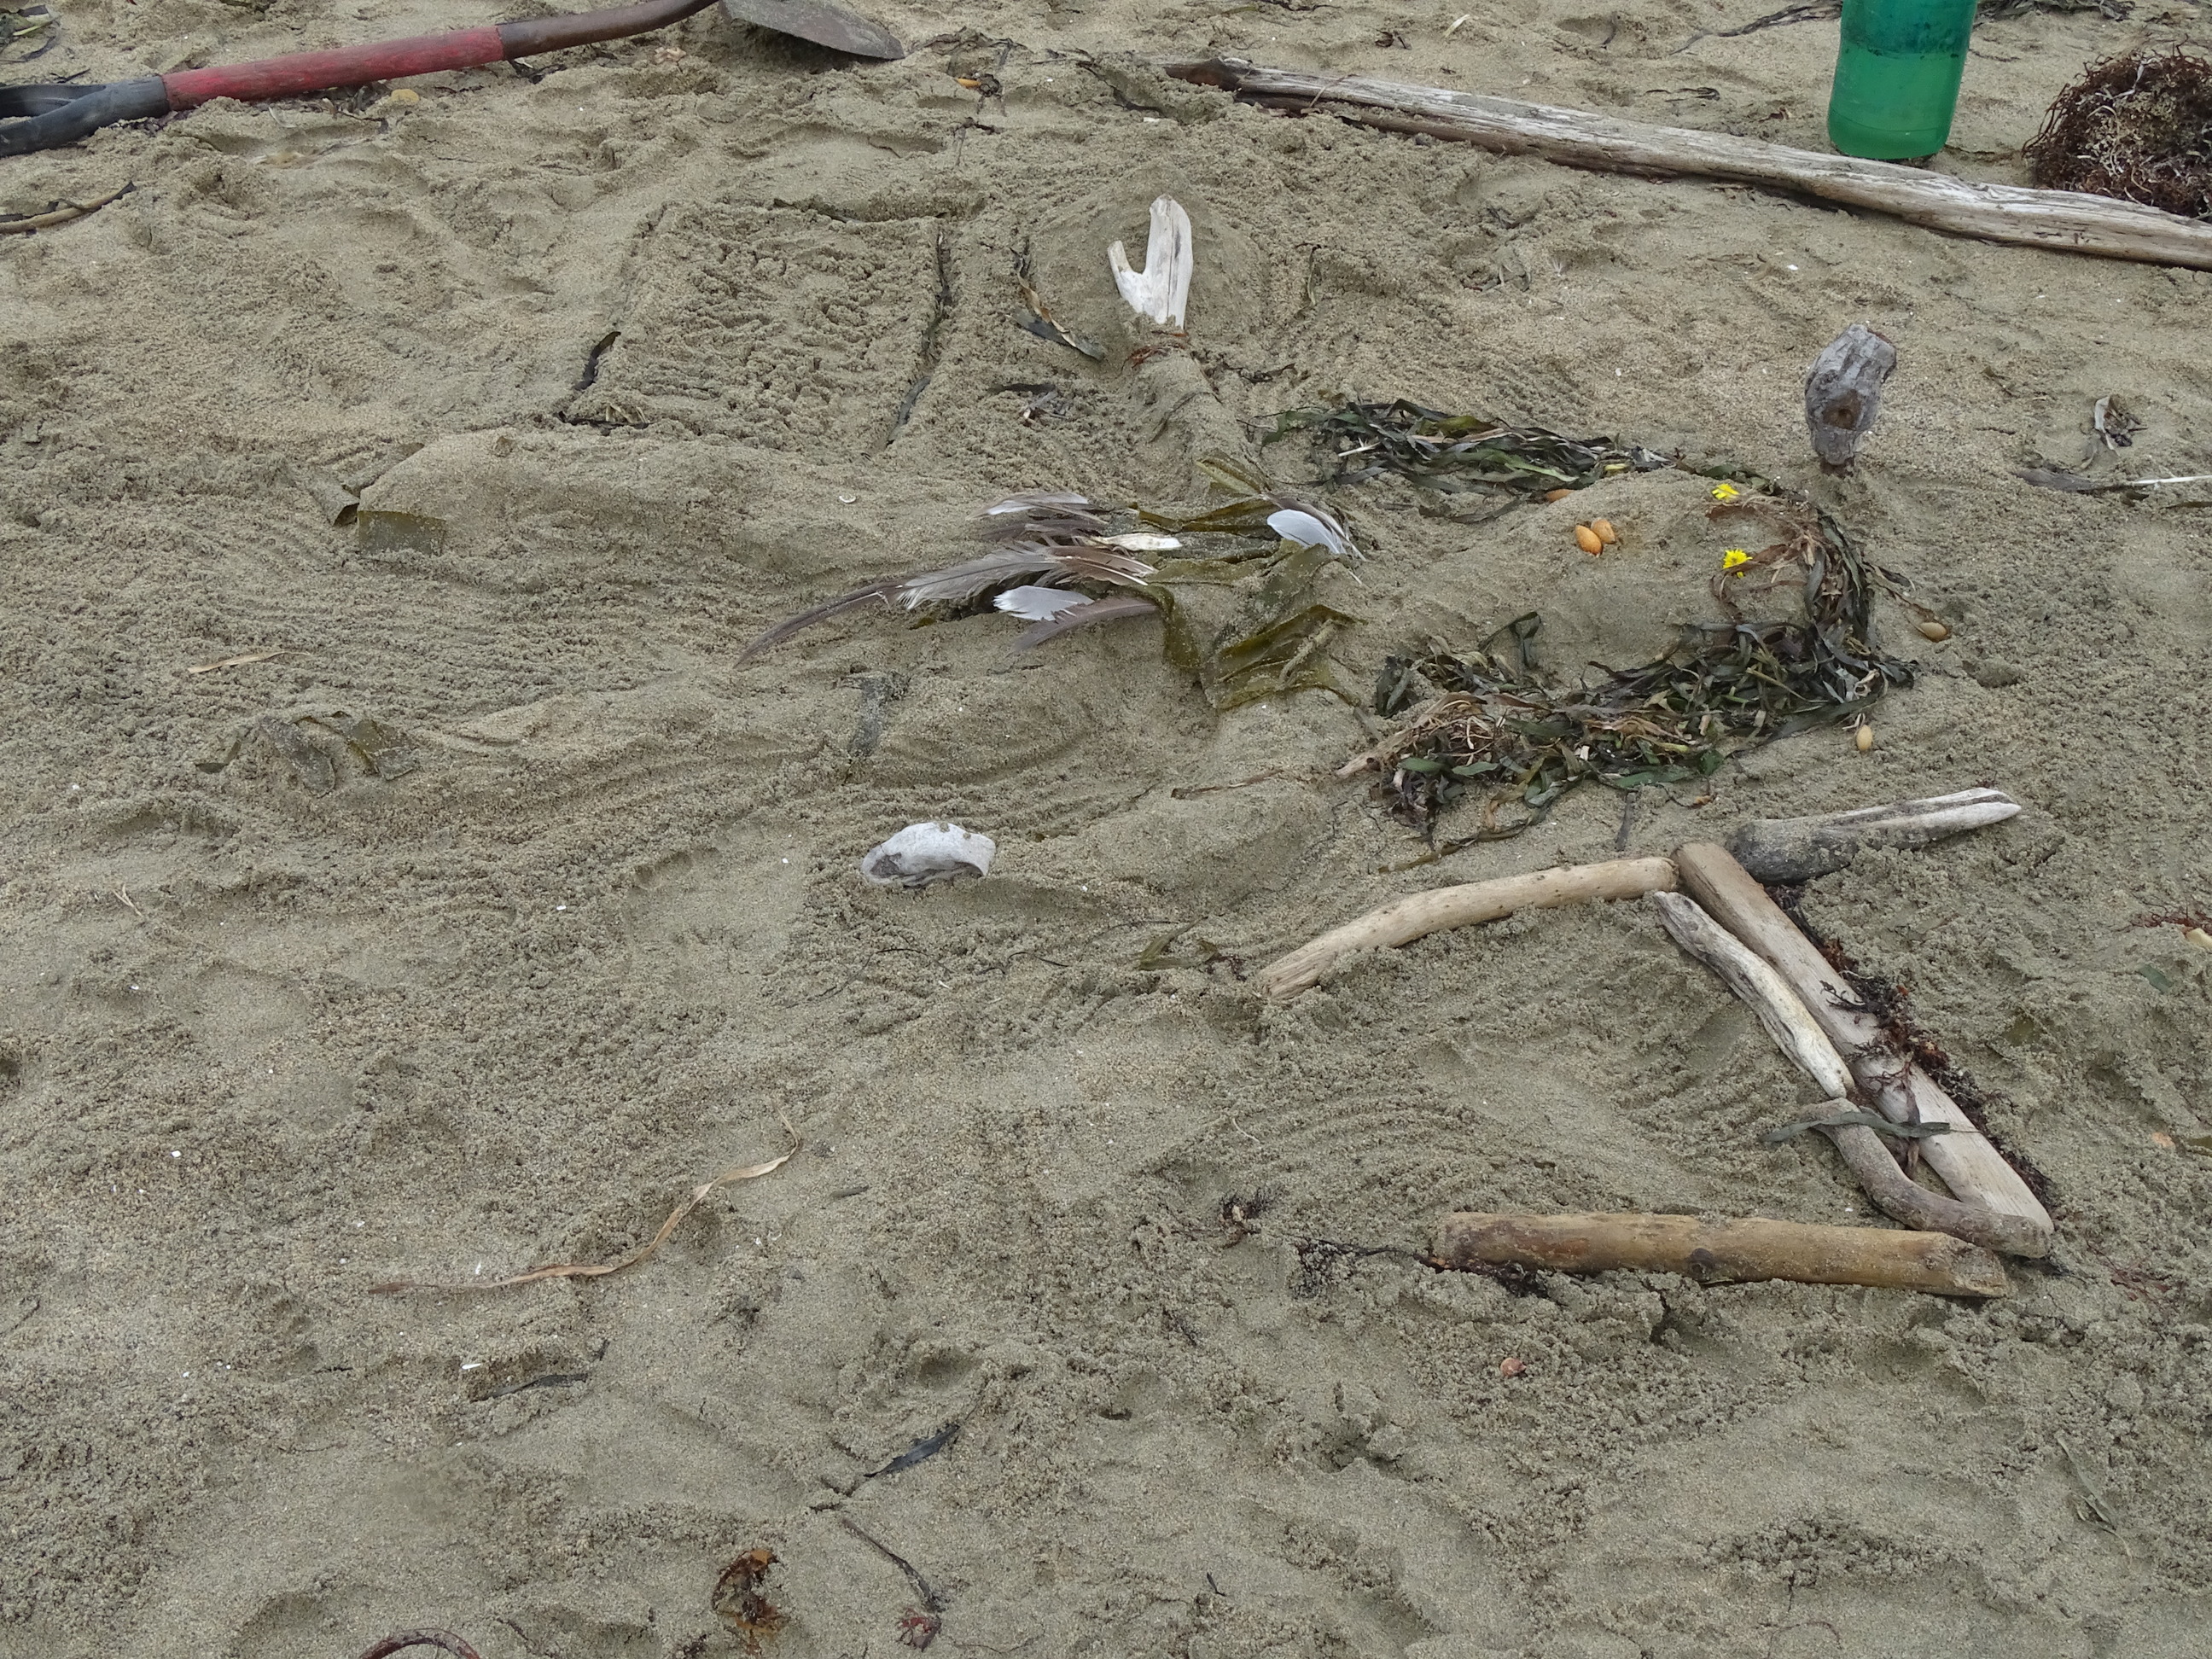 A sand sculpture of a woman made of sand, seaweed, shells, feathers, and driftwood.